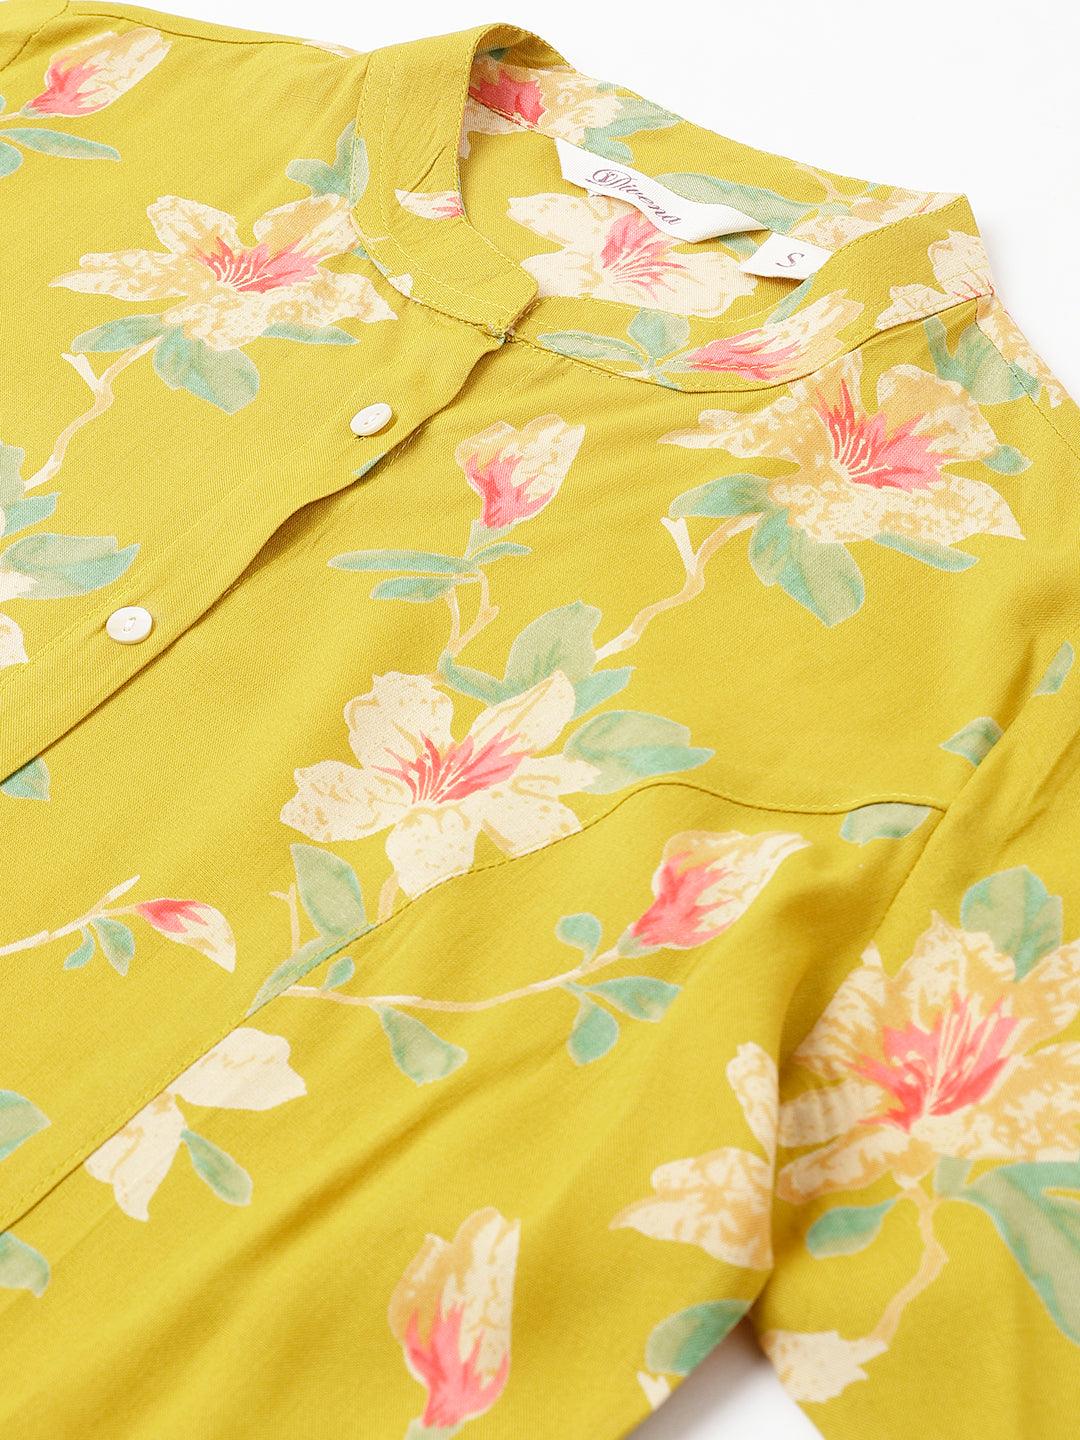 Divena Yellow Floral printed Rayon A-line Shirts Style Top - divena world